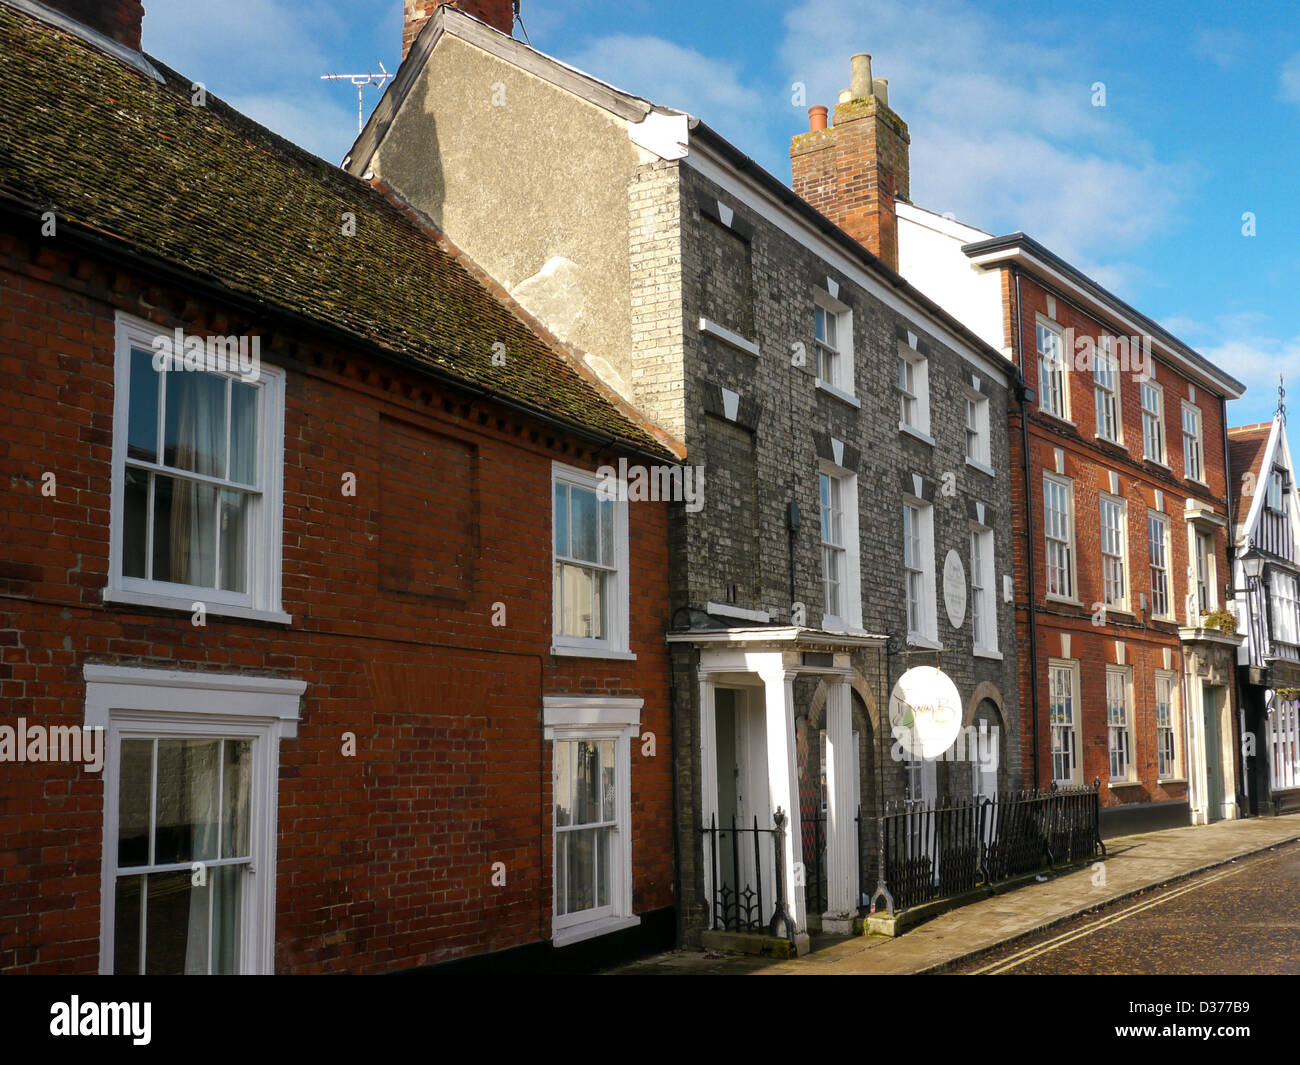 A row of Tudor and Georgian style houses in the market town of Framlingham Suffolk, UK Stock Photo